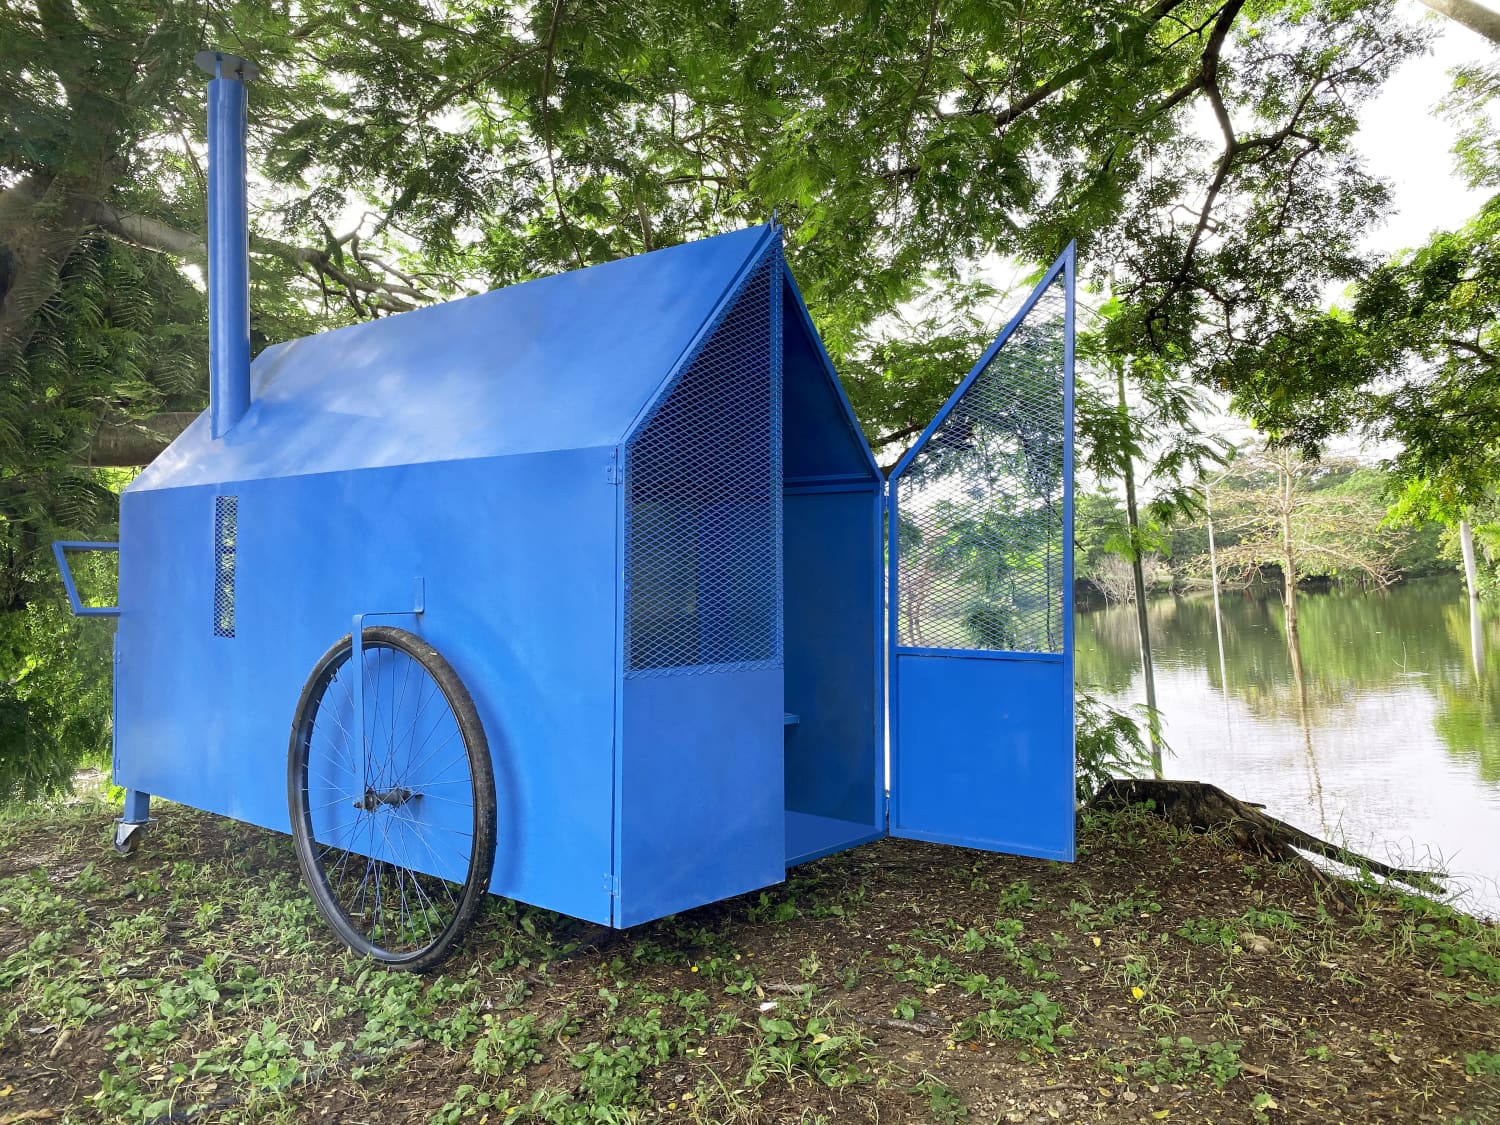 This Tiny Mobile House Offers Shelter For the Homeless—and Redefines Public Space